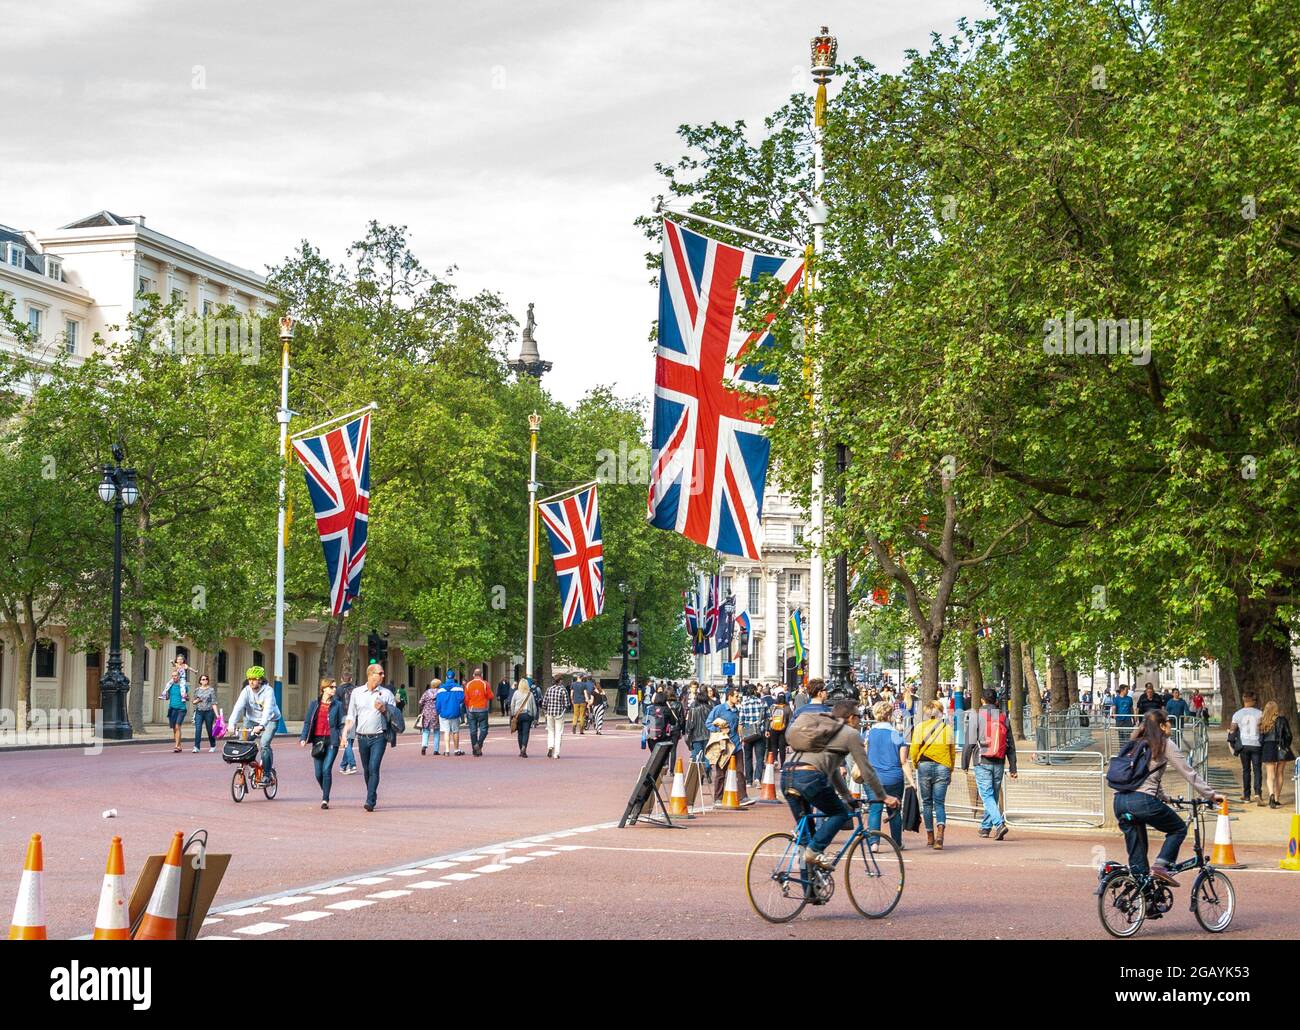 London - UK, 2015-05-10:  Londen celebrates the 70th anniversary of the end of the Second World War in Europe on VEday,  the commemoration of Victory in Europe Day. People amble and cycle down the Mall, a tree-lined royal road leading from Trafalgar Square to Buckingham Palace, decorated with British flags on both sides. Here looking towards Trafalgar Square. In the background, the statue of Admiral Horatio Nelson atop Nelson's column rises just above the trees. Archive photo. Stock Photo